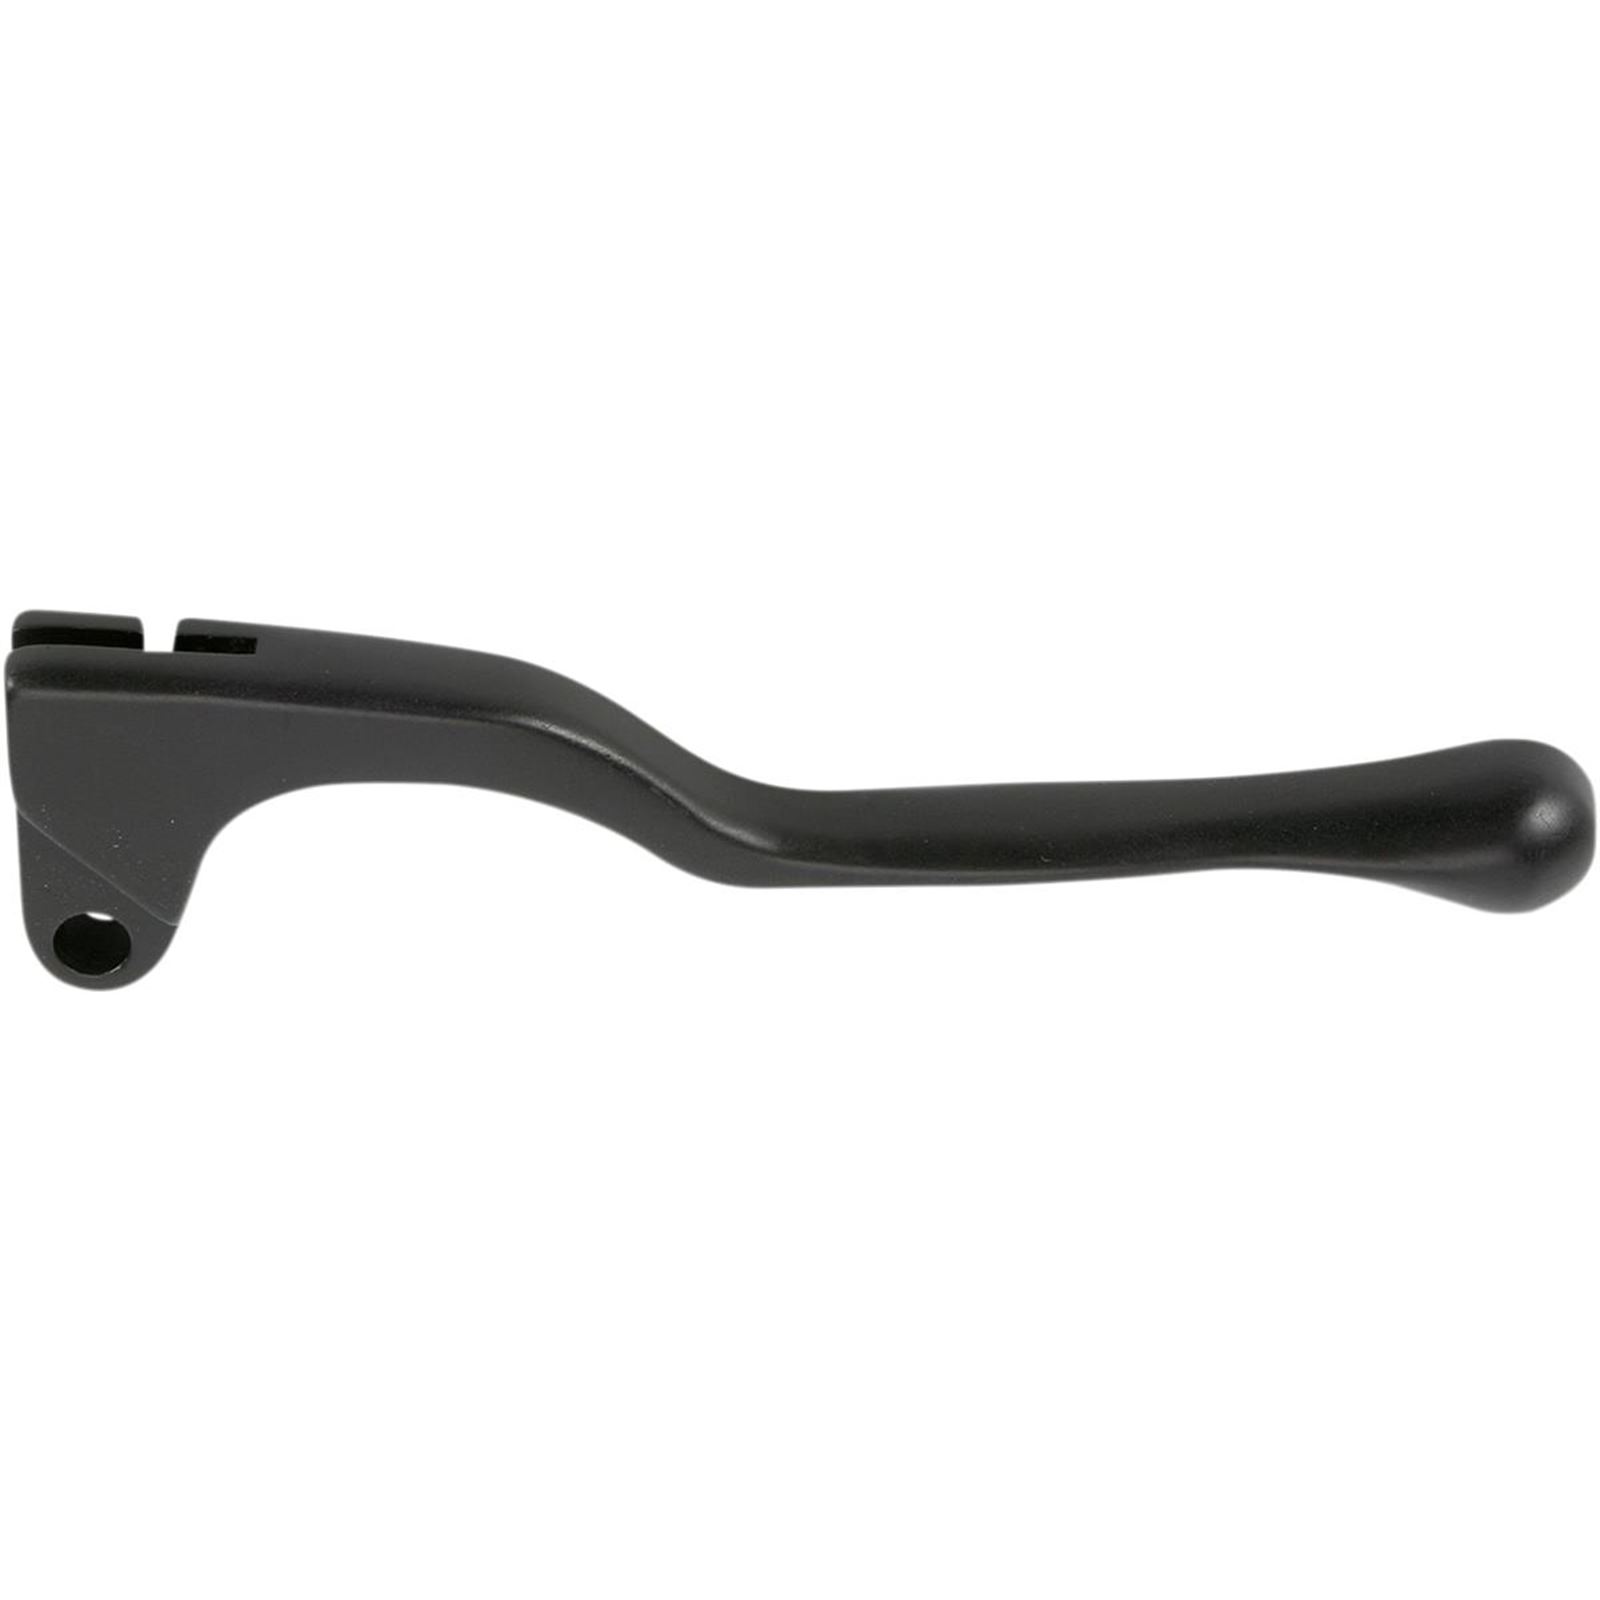 Parts Unlimited Lever - Right-Hand for Honda